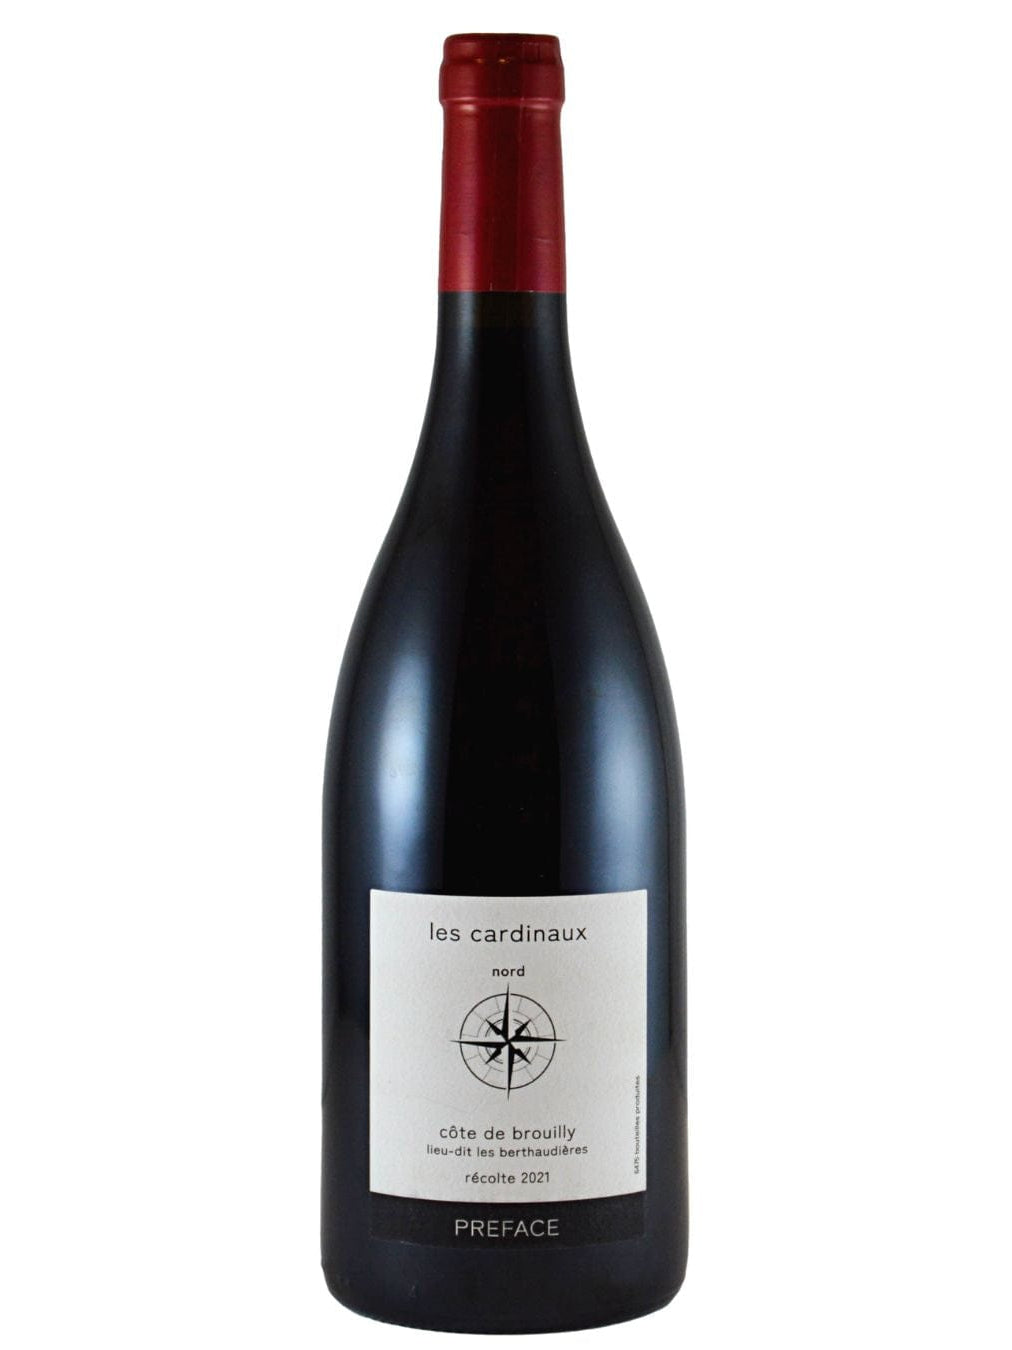 Shop Domaine les Cardinaux 2021 Les Cardinaux Cote de Brouilly Les Berthaudières online at PENTICTON artisanal French wine store in Hong Kong. Discover other French wines, promotions, workshops and featured offers at pentictonpacific.com 